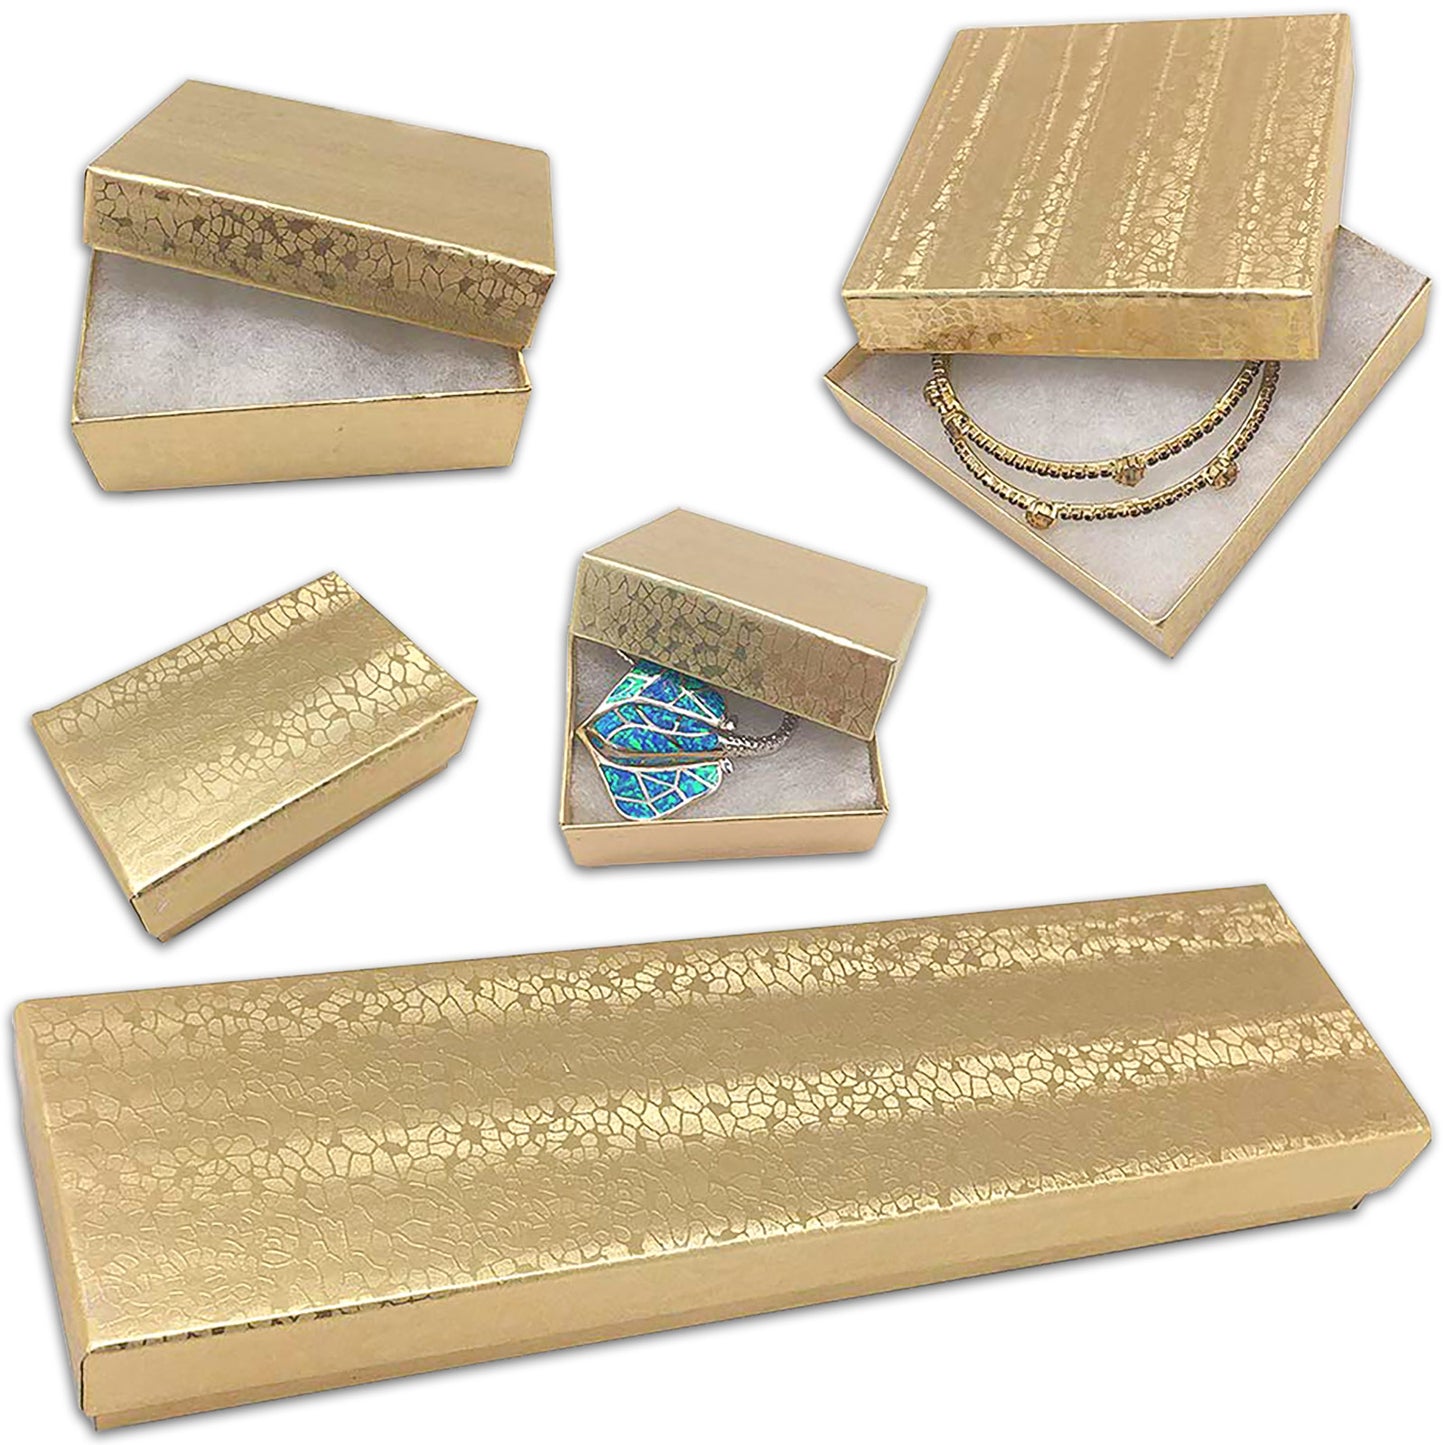 Cotton Filled Jewelry Box Assortment in Gold Foil